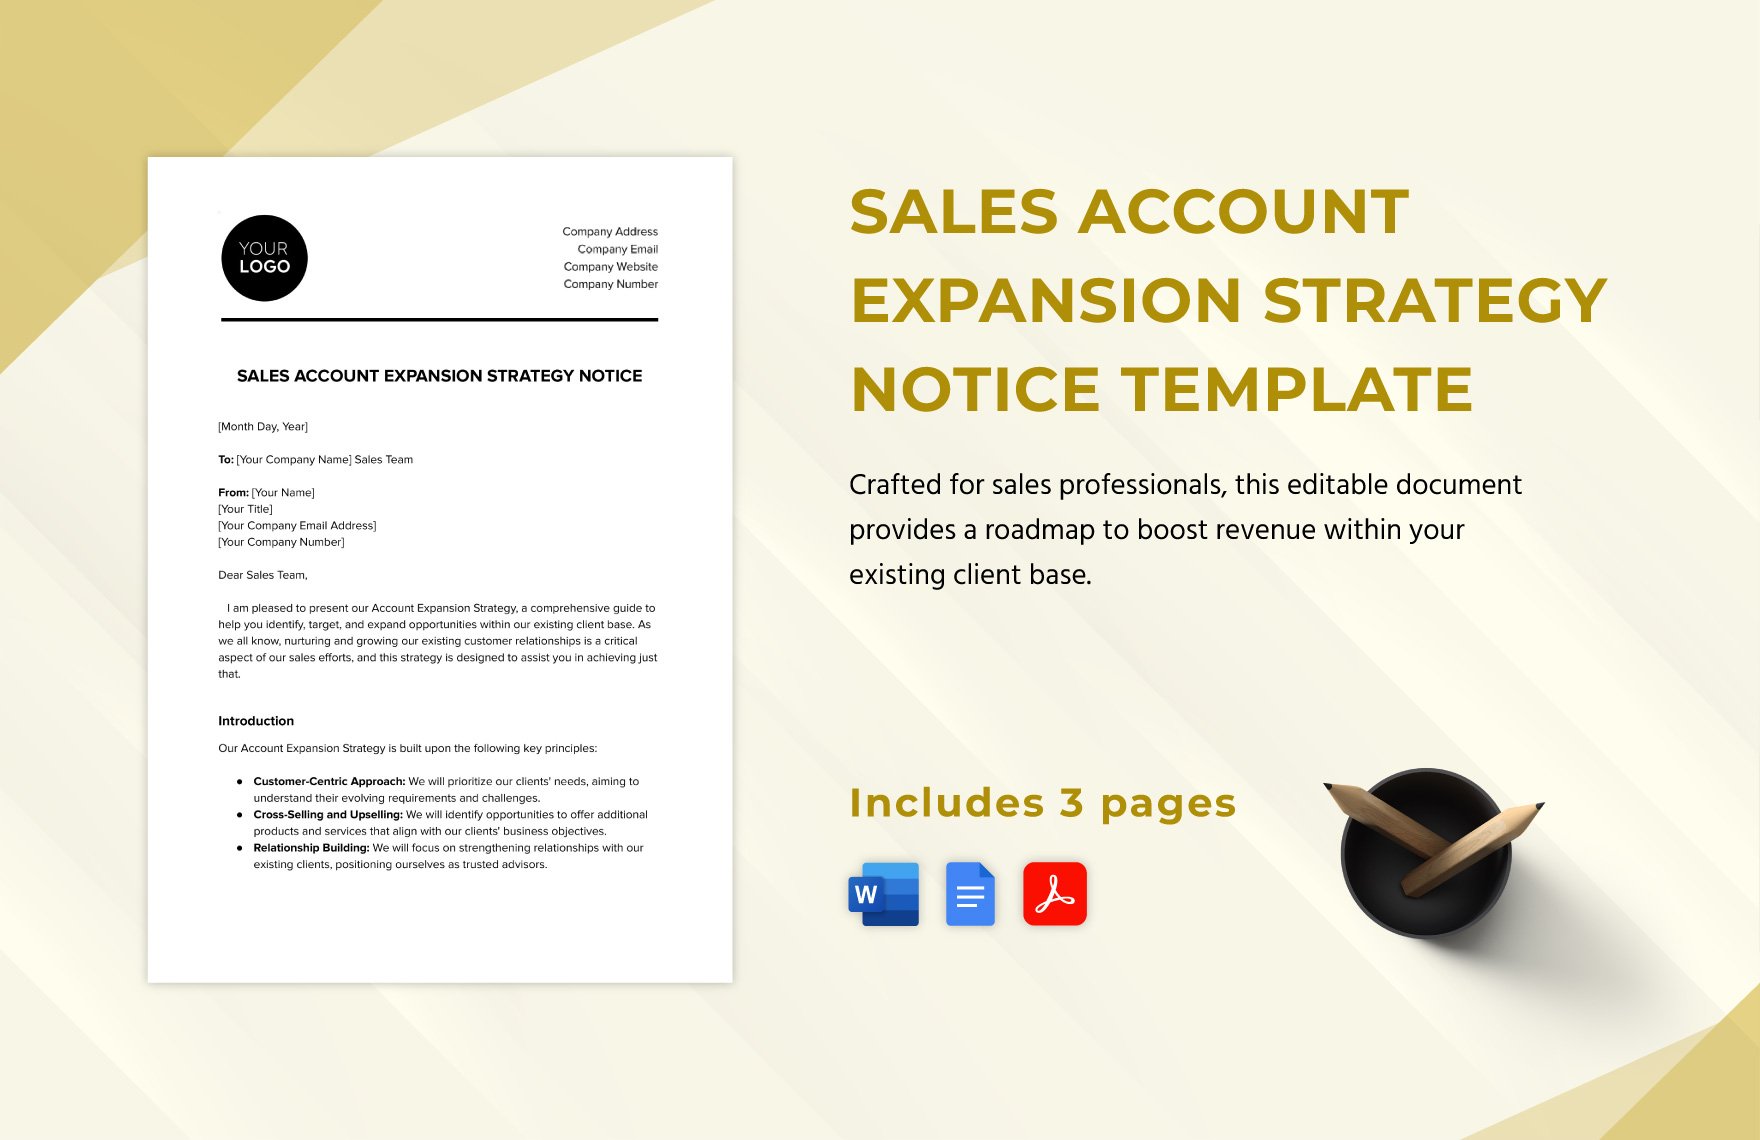 Sales Account Expansion Strategy Notice Template in Word, Google Docs, PDF